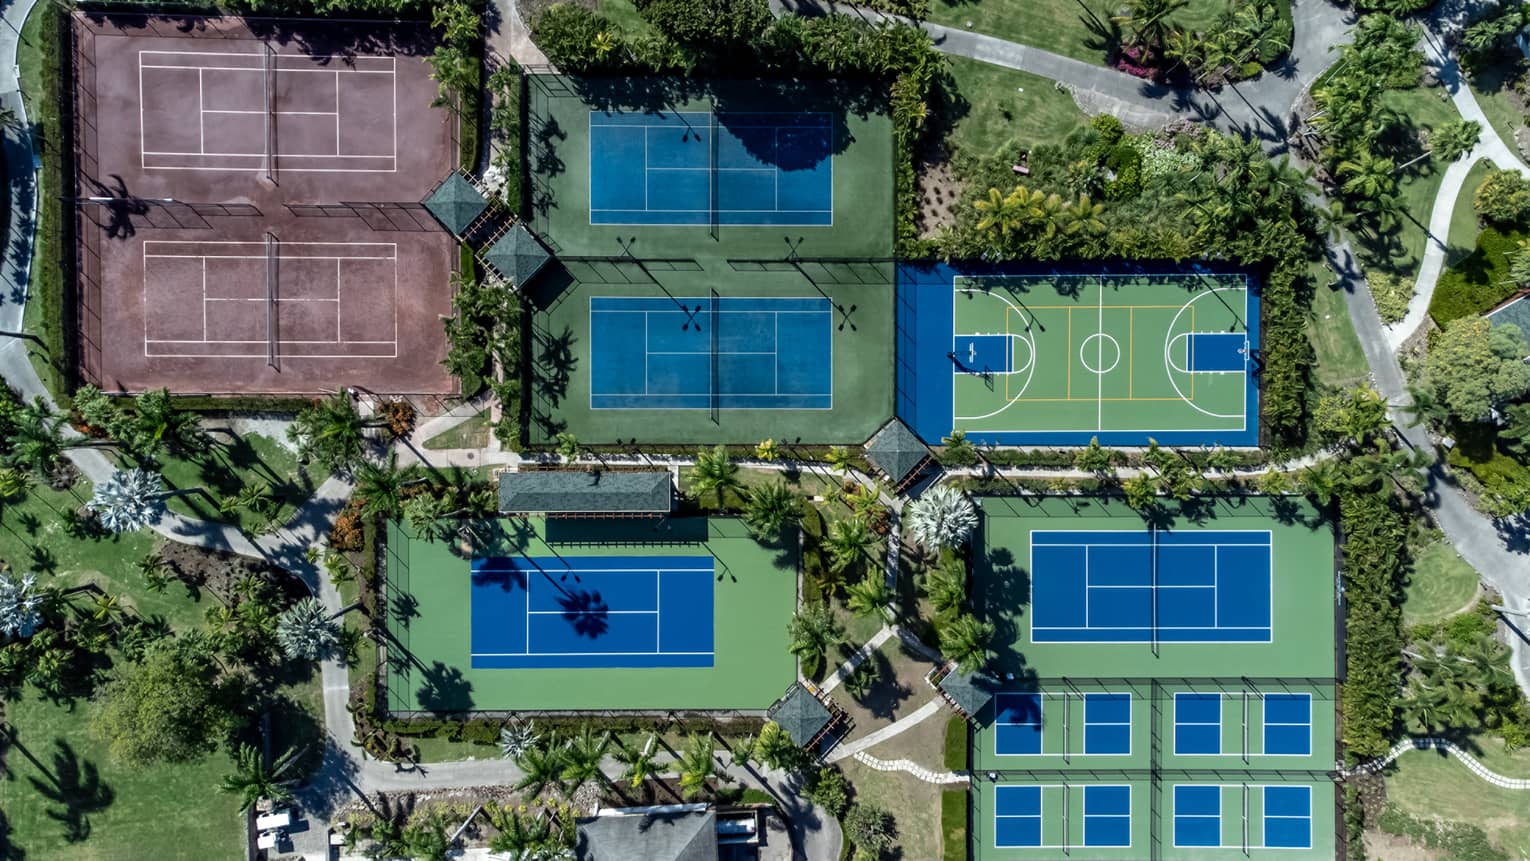 An aerial view of different tennis and pickleball courts surrounded by trees.